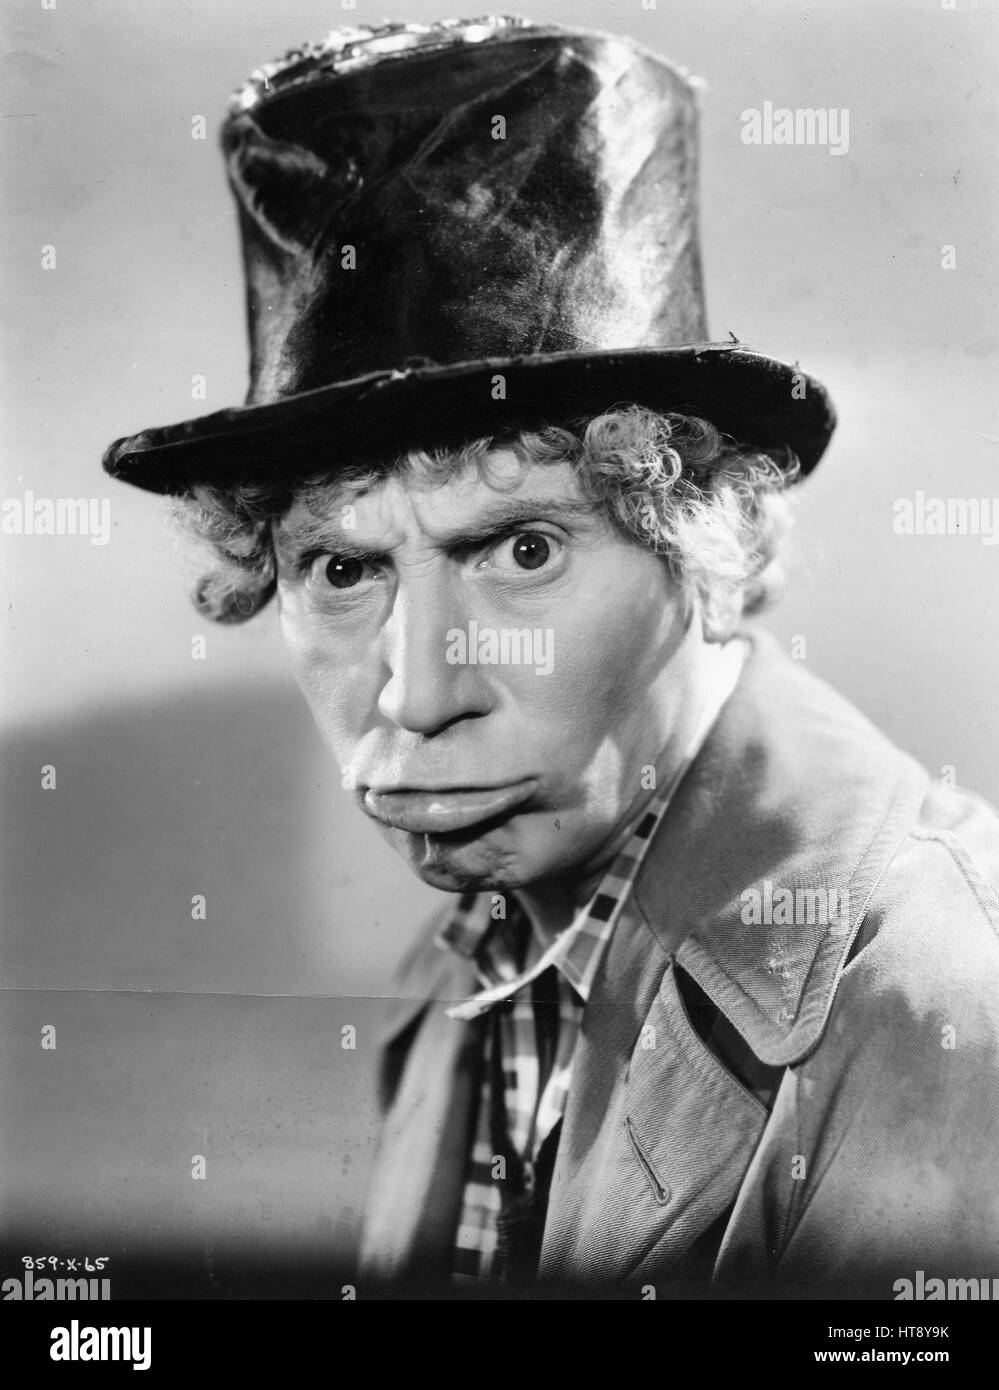 'It isn't the Boogy man...It's merely Harpo Marx practicing making faces for 'A Night at the Opera,' the new Marx Brothers comedy produced by Irving G. Thalberg at Metro-Goldwyn-Mayer. Harpo finally scared himself so badly with a mean face that he ran and hid.' Stock Photo